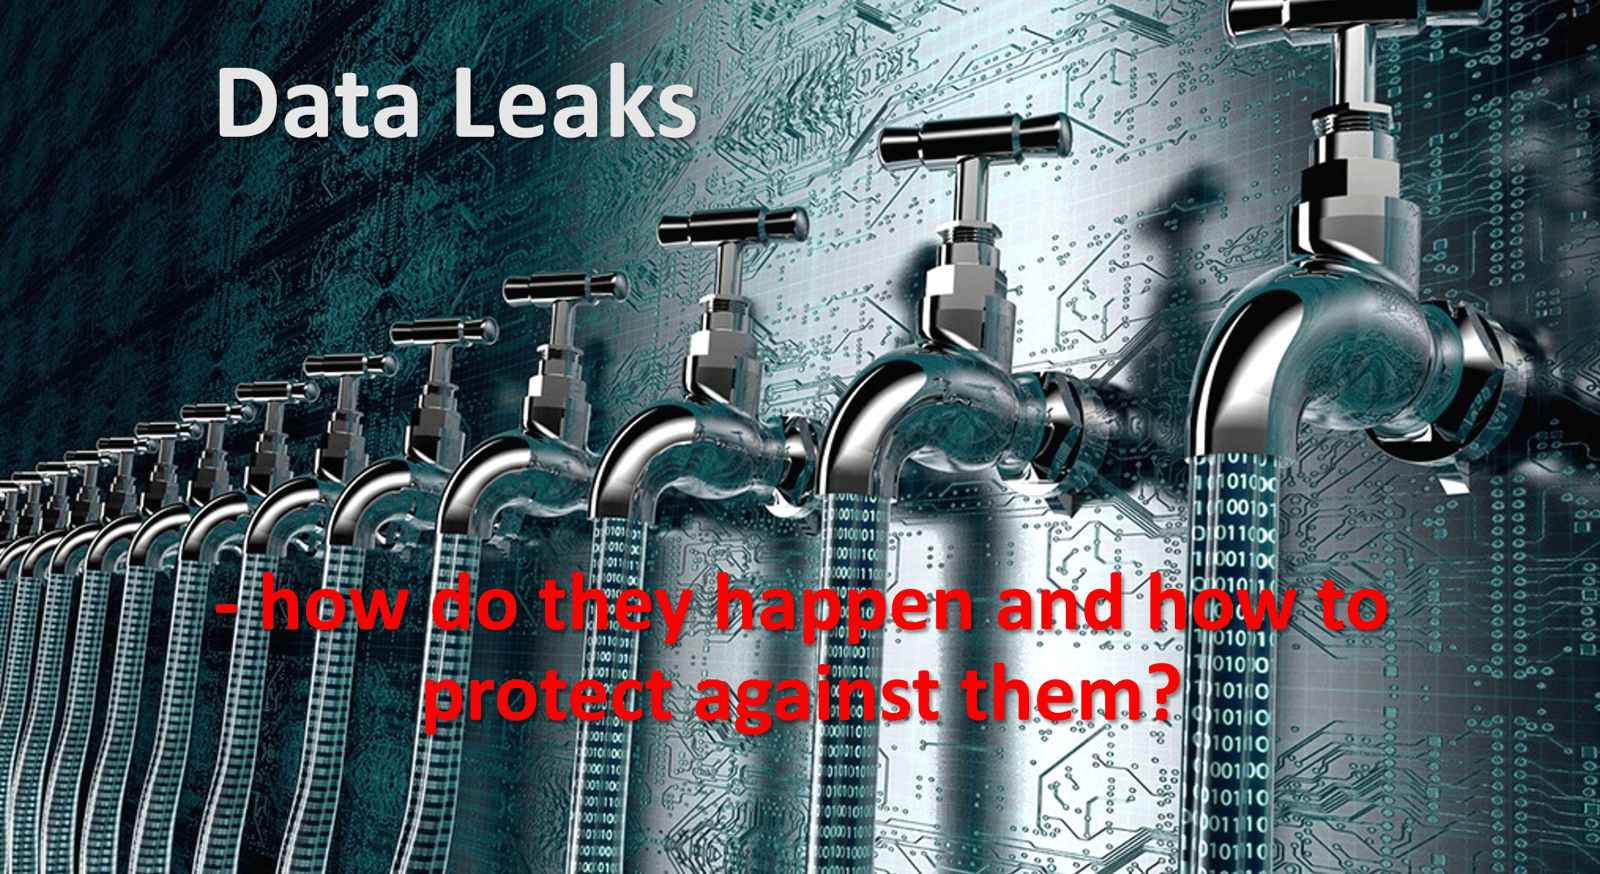 Data leaks - how do they happen and how to protect against them?